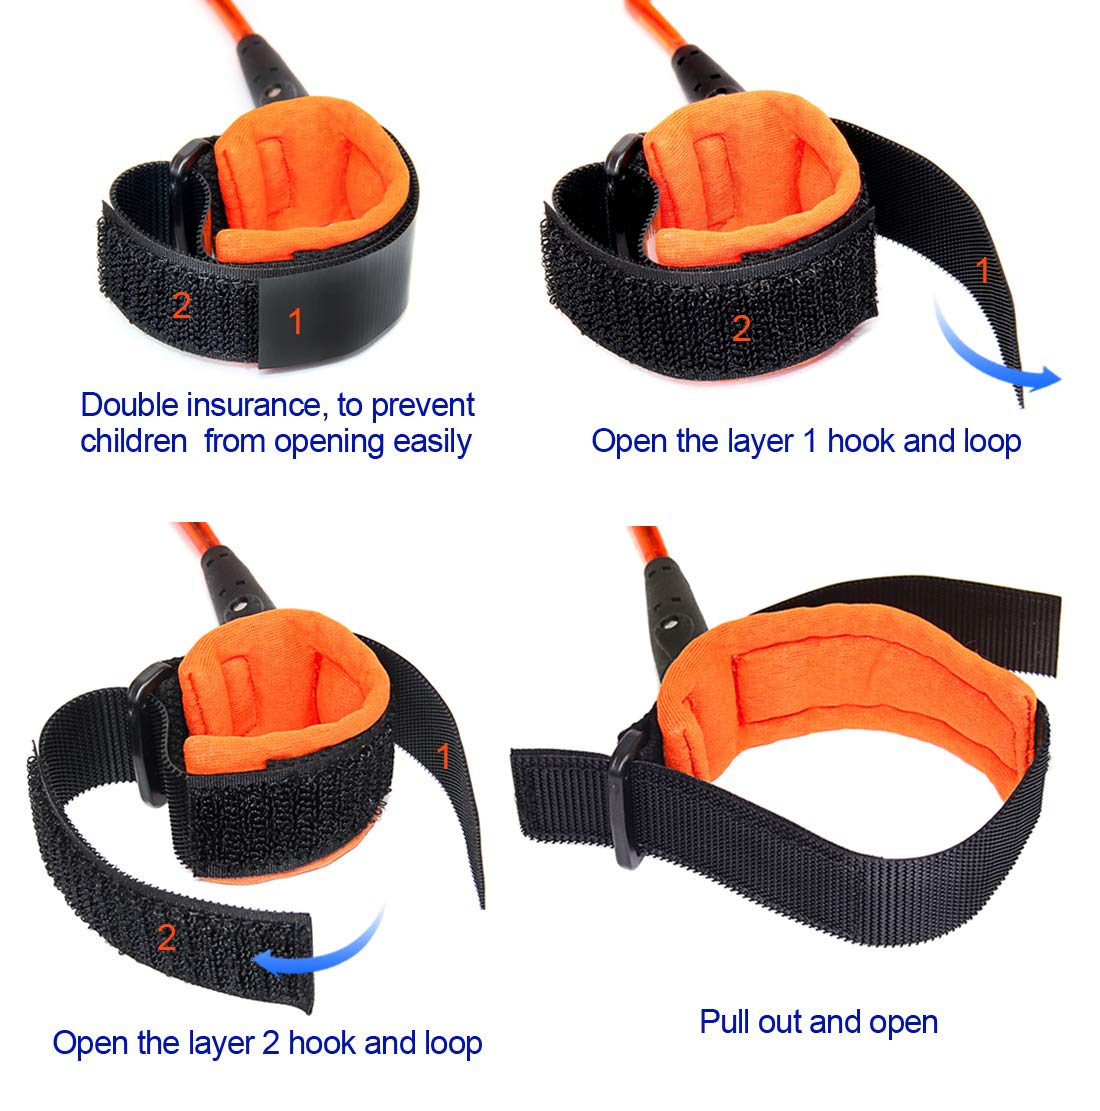 Blisstime Anti Lost Wrist Link Safety Wrist Link for Toddlers, Babies & Kids.